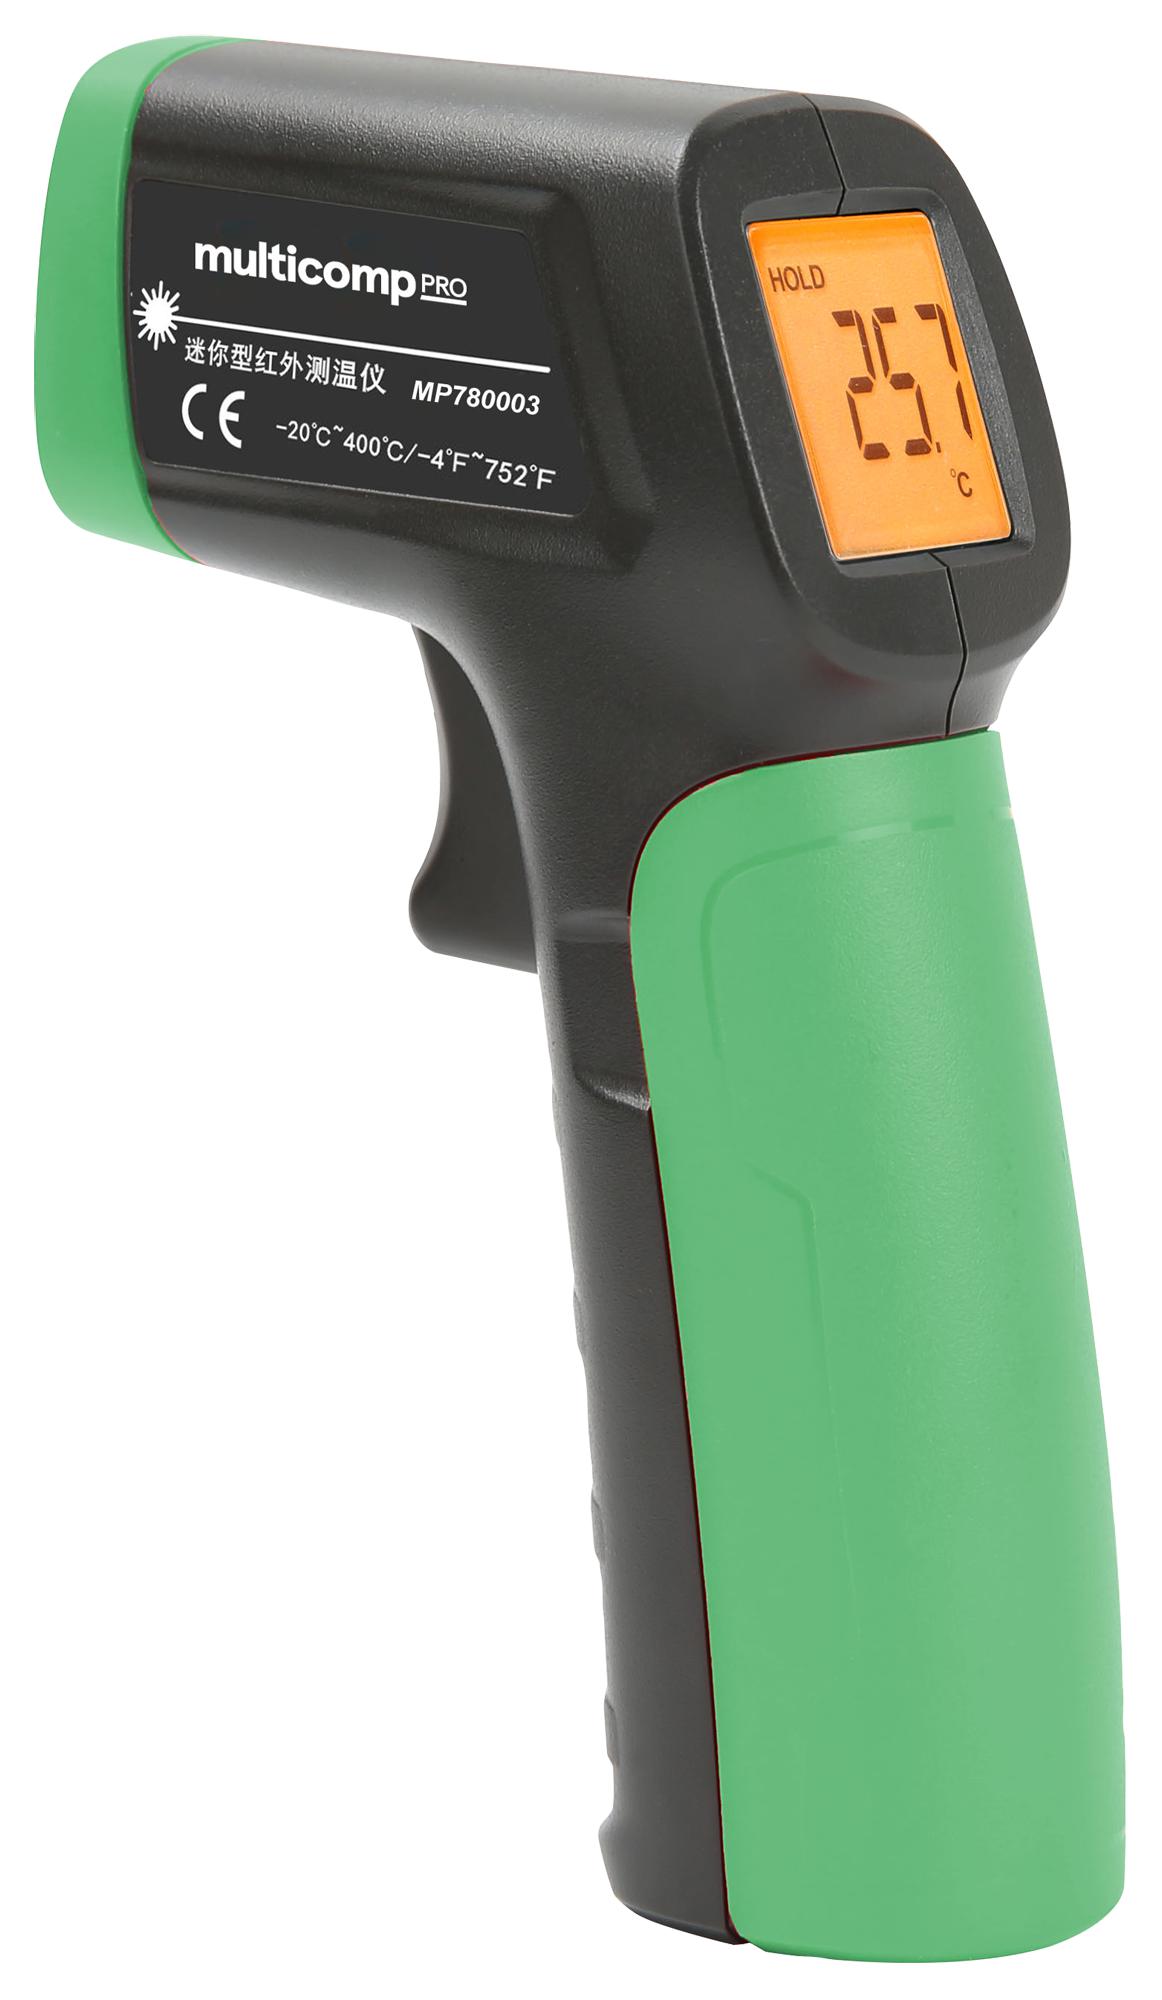 MP780003 INFRARED THERMOMETER, -20 TO 400 DEG C MULTICOMP PRO